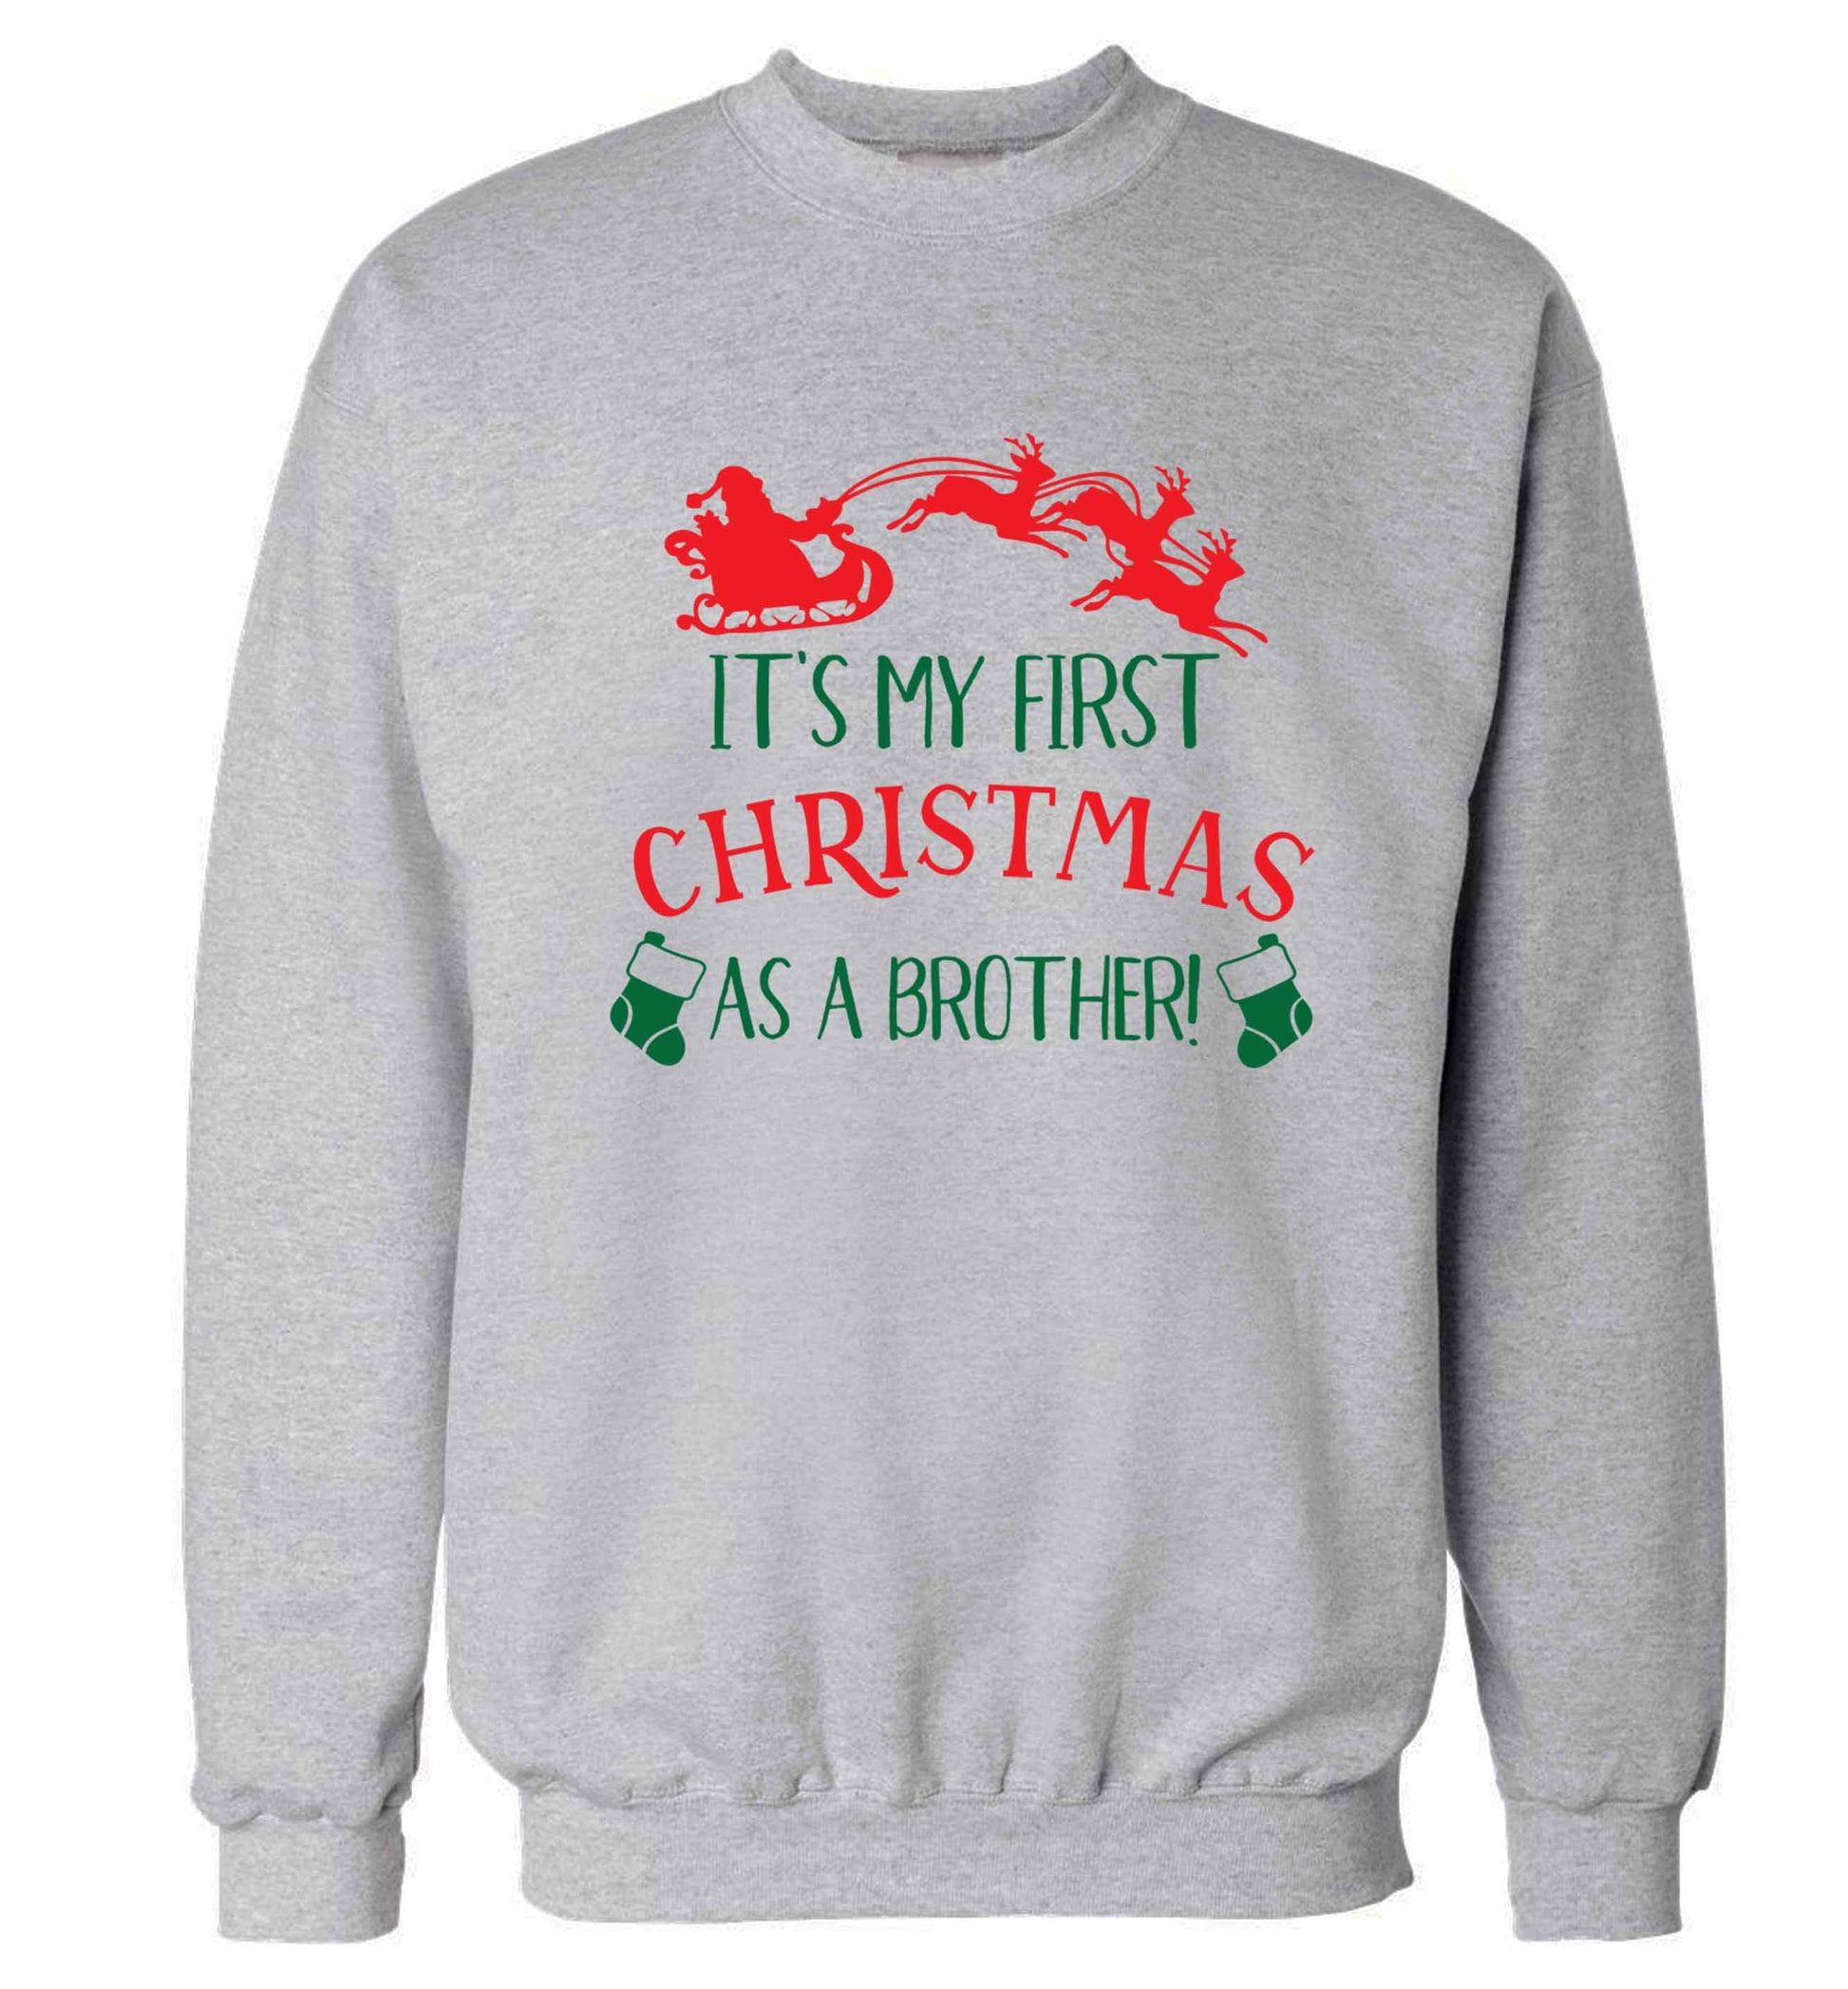 It's my first Christmas as a brother! Adult's unisex grey Sweater 2XL